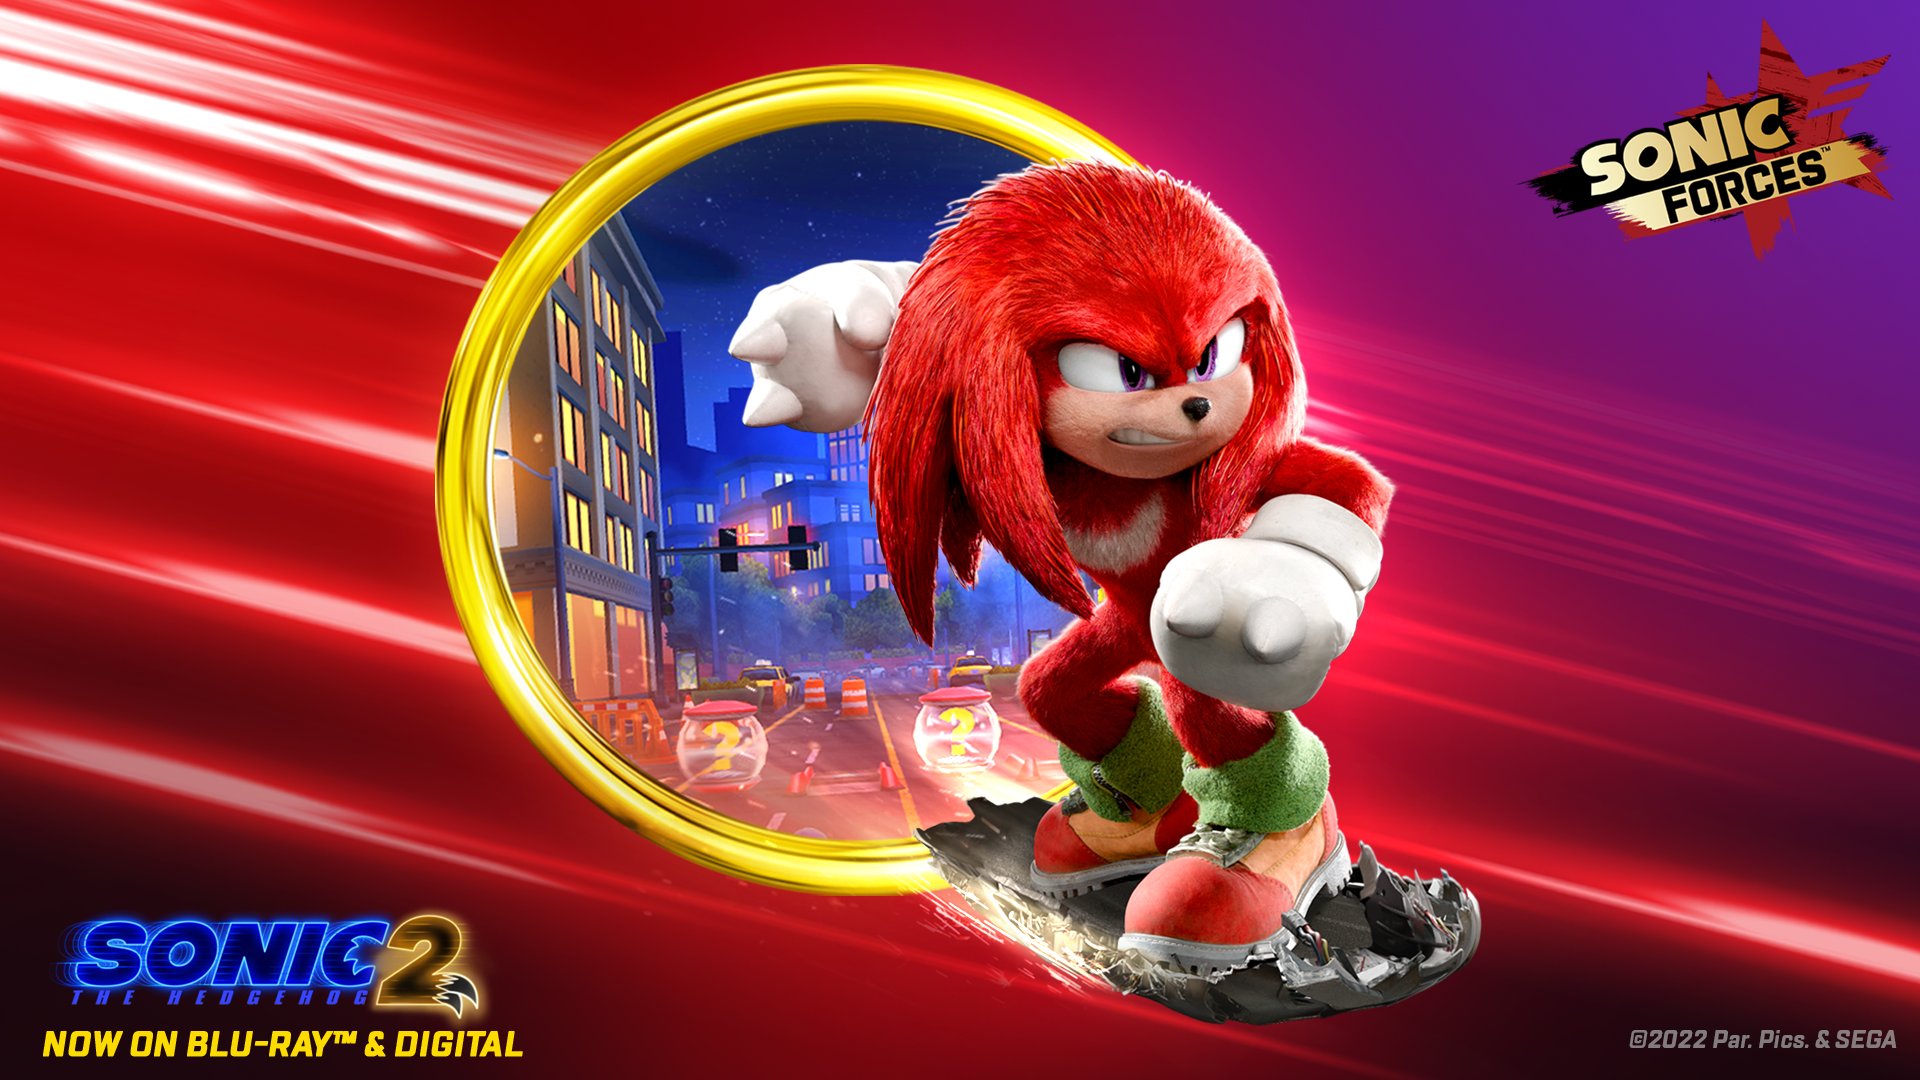 Knuckles The Echidna Images Kuckles Hd Wallpaper And  Knuckles Echidna  Crying  Free Transparent PNG Download  PNGkey